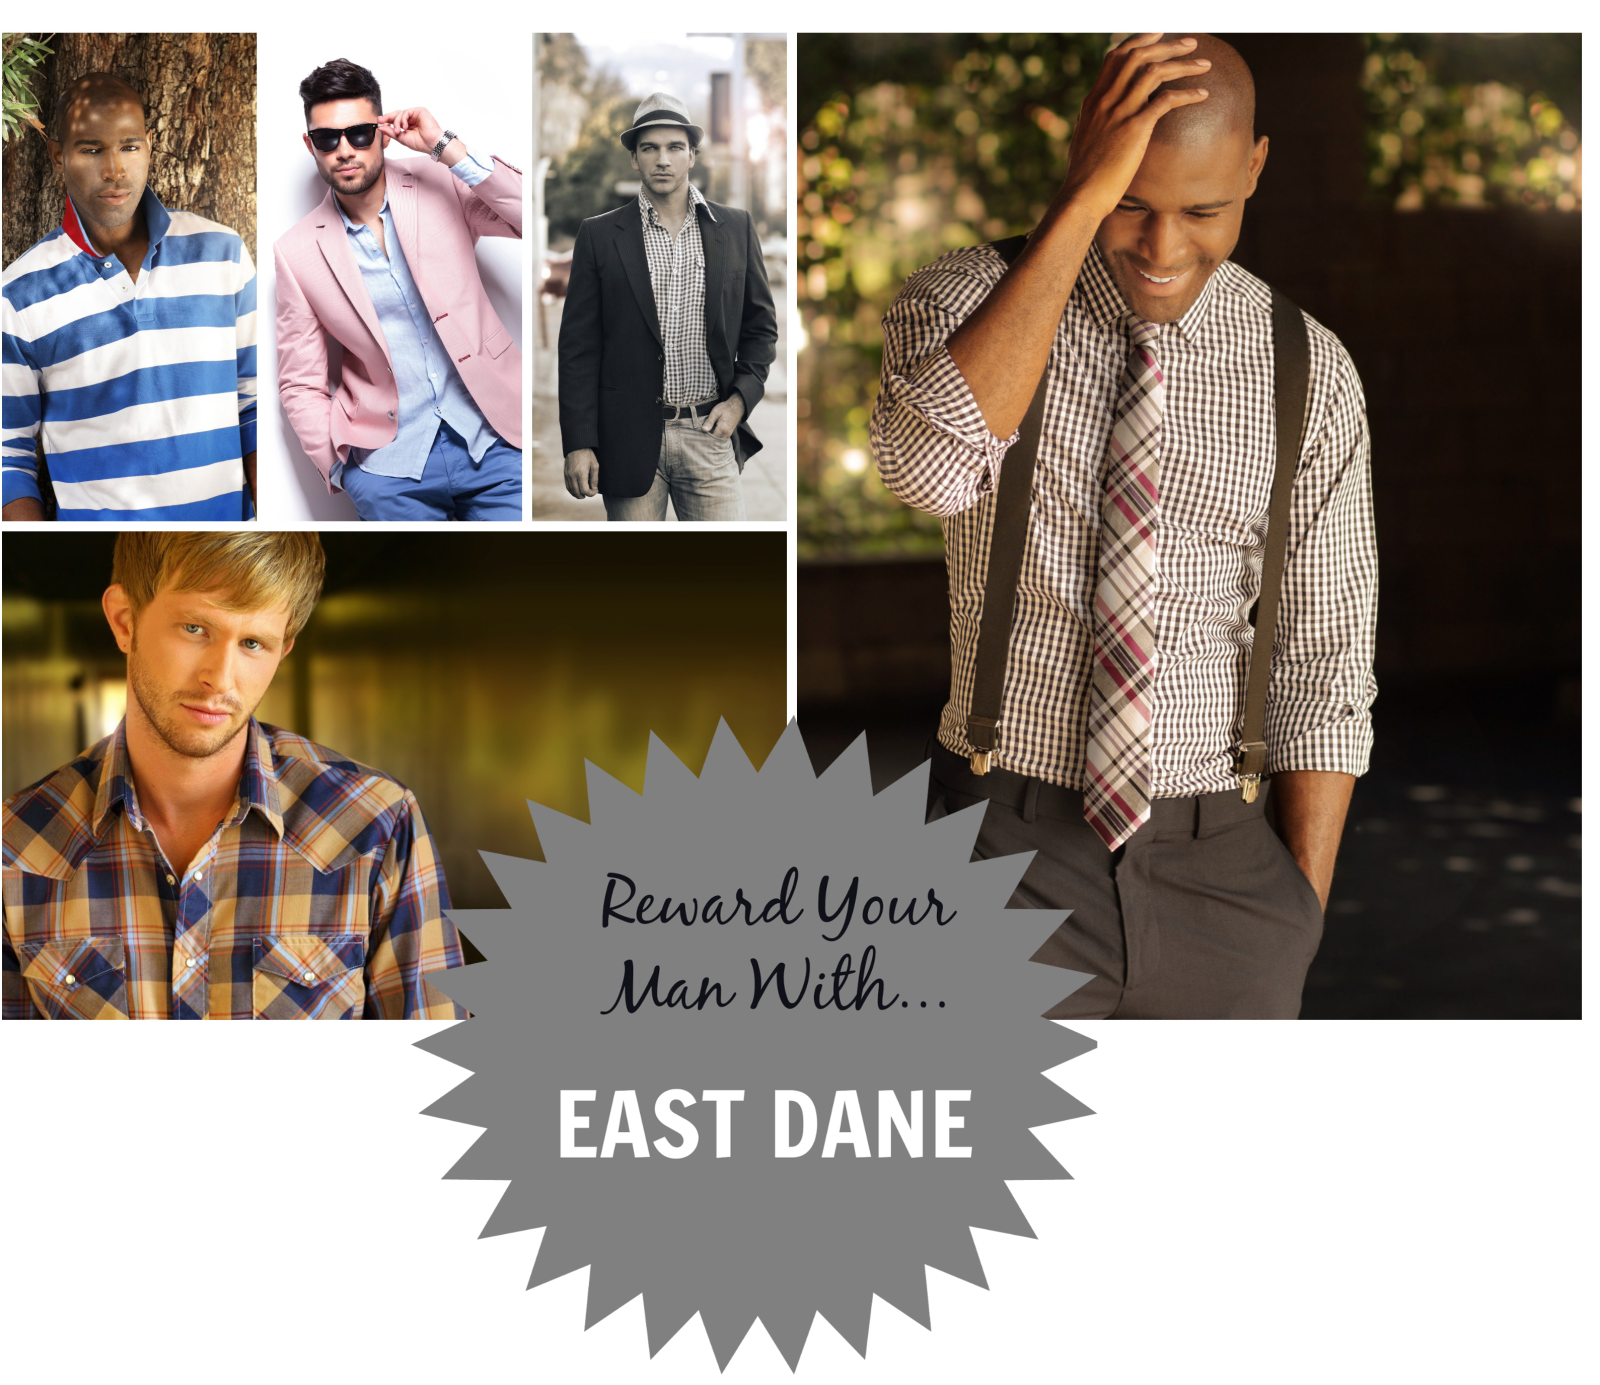 Give Your Man a Fashion Boost in the EastDane.com Give Away! 4-Winners!!